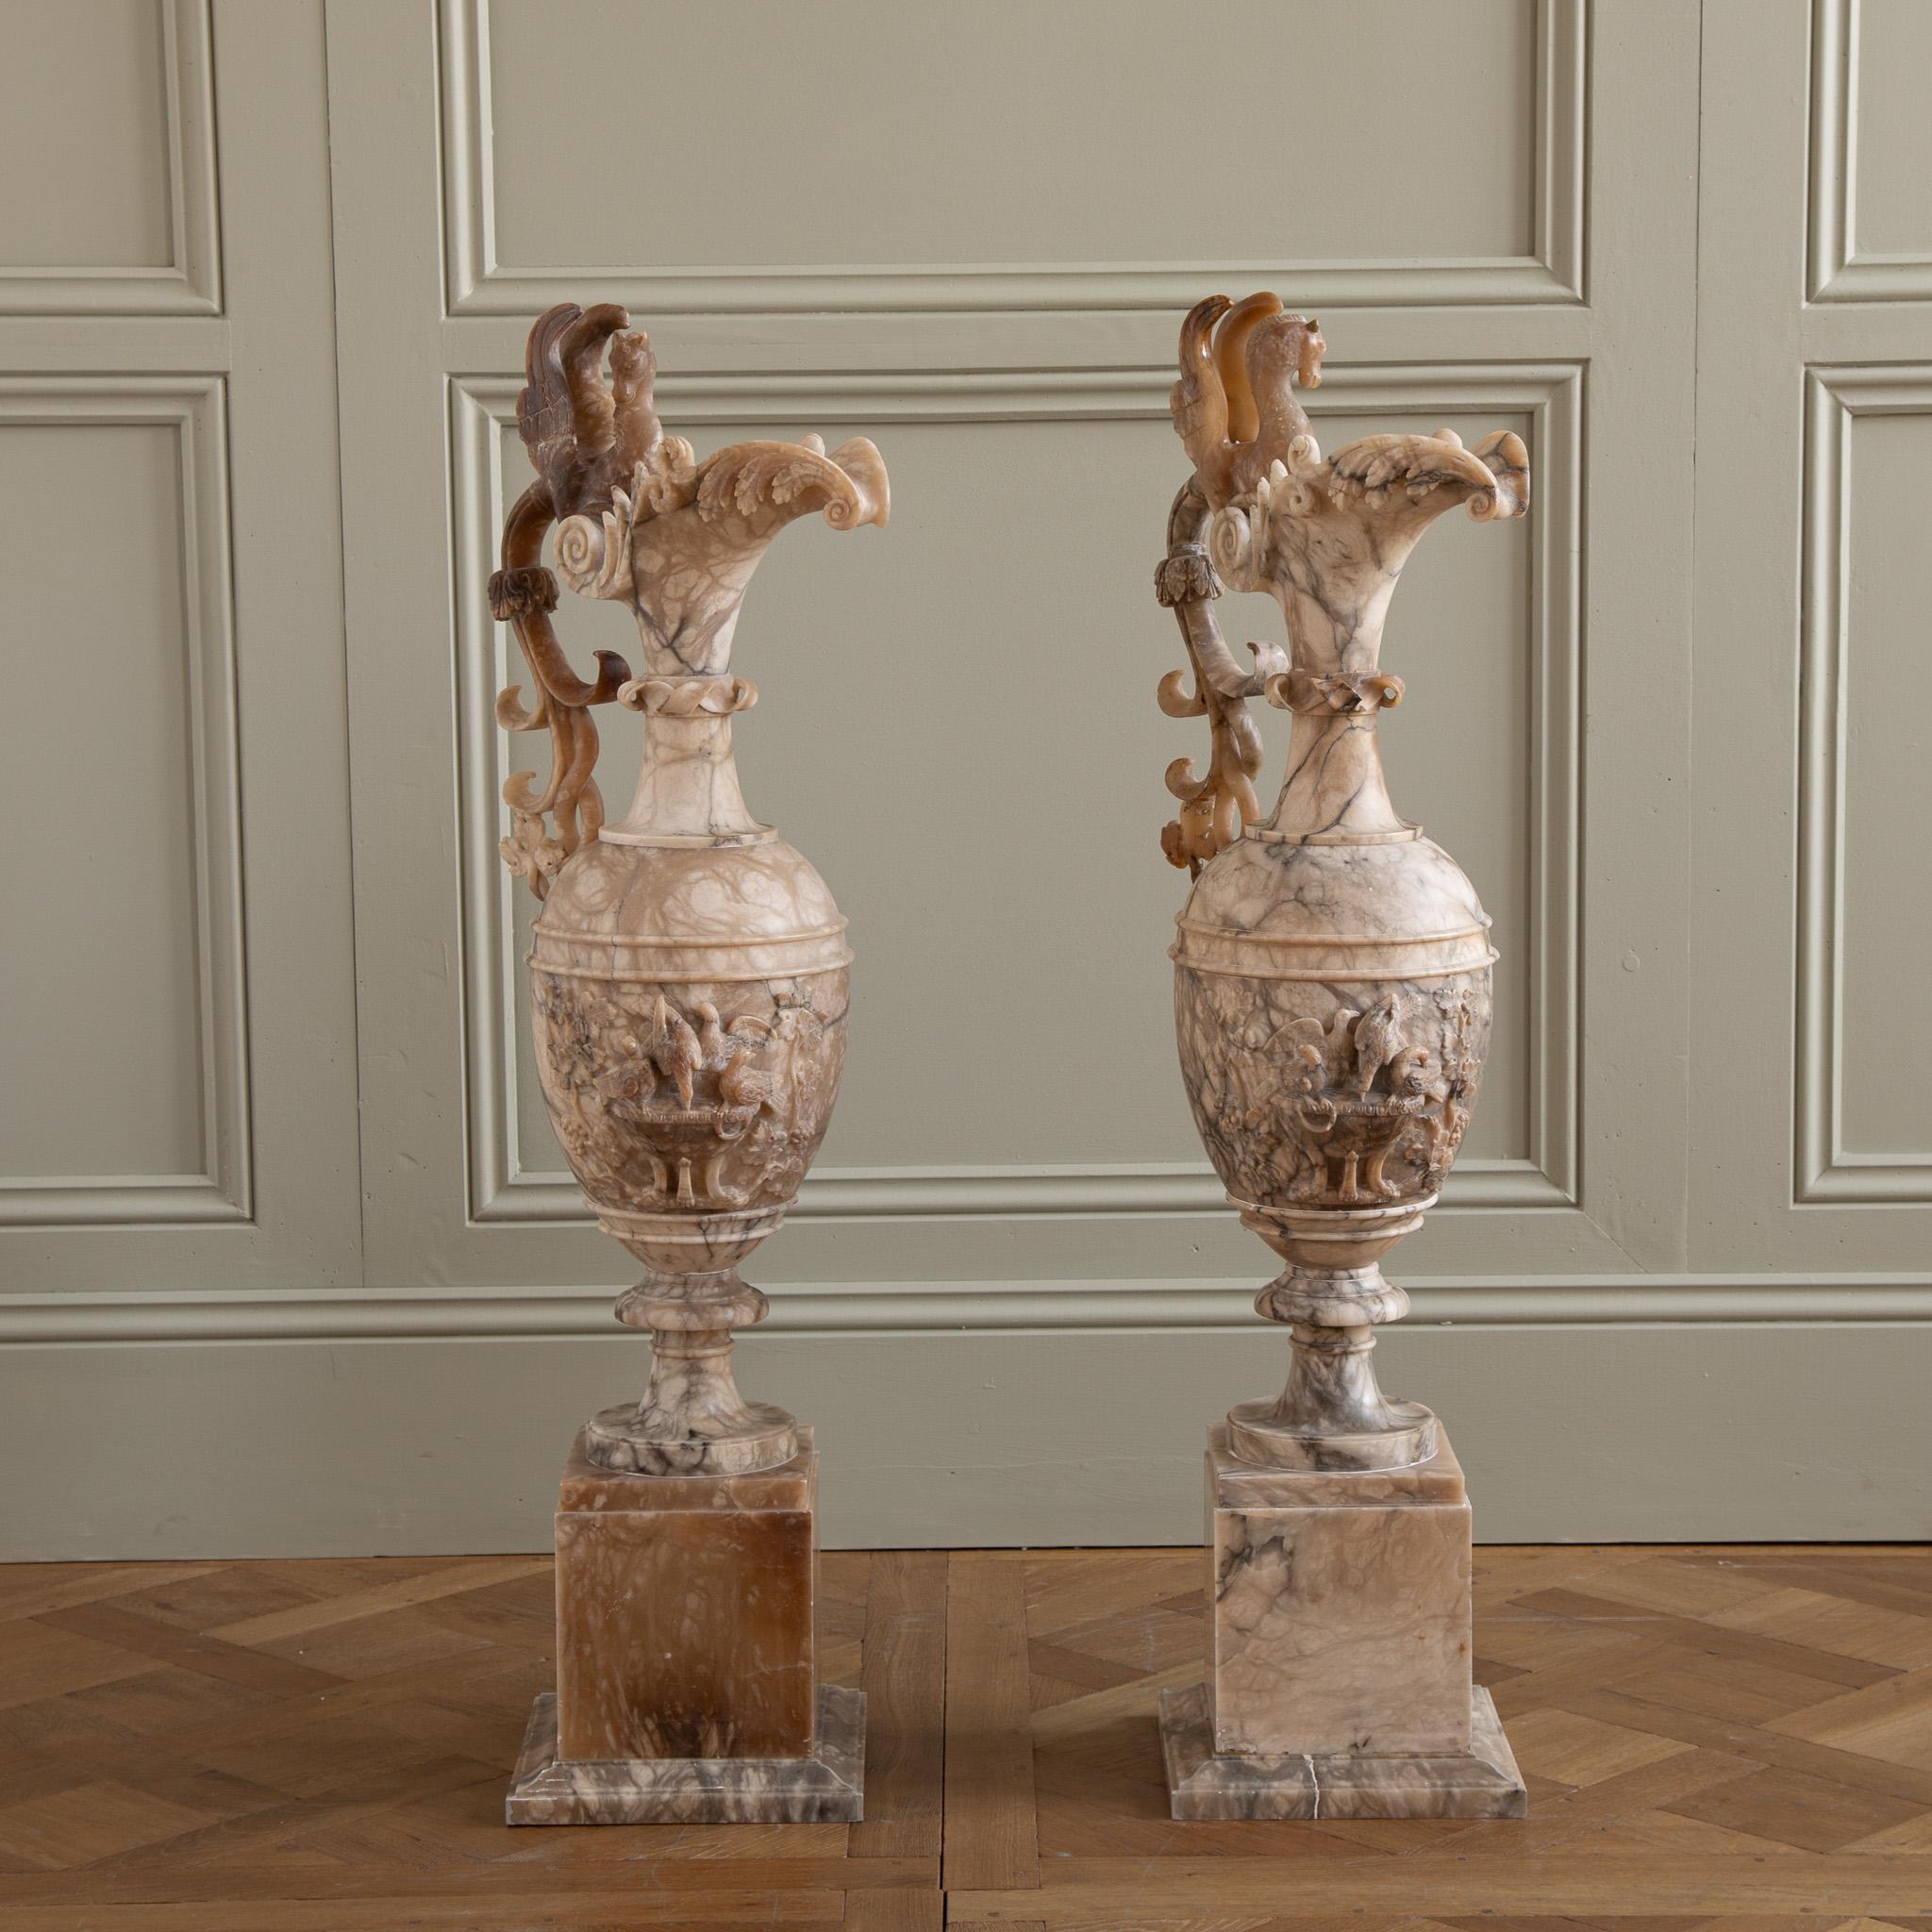 An exceptional pair of elegantly tall, 19th Century, French Decorative pitchers on plinths, hand carved in a beautifully veined Alabaster marble. The Neo Classical style pieces, each feature a hippocampus, the winged sea horse of Greek mythology